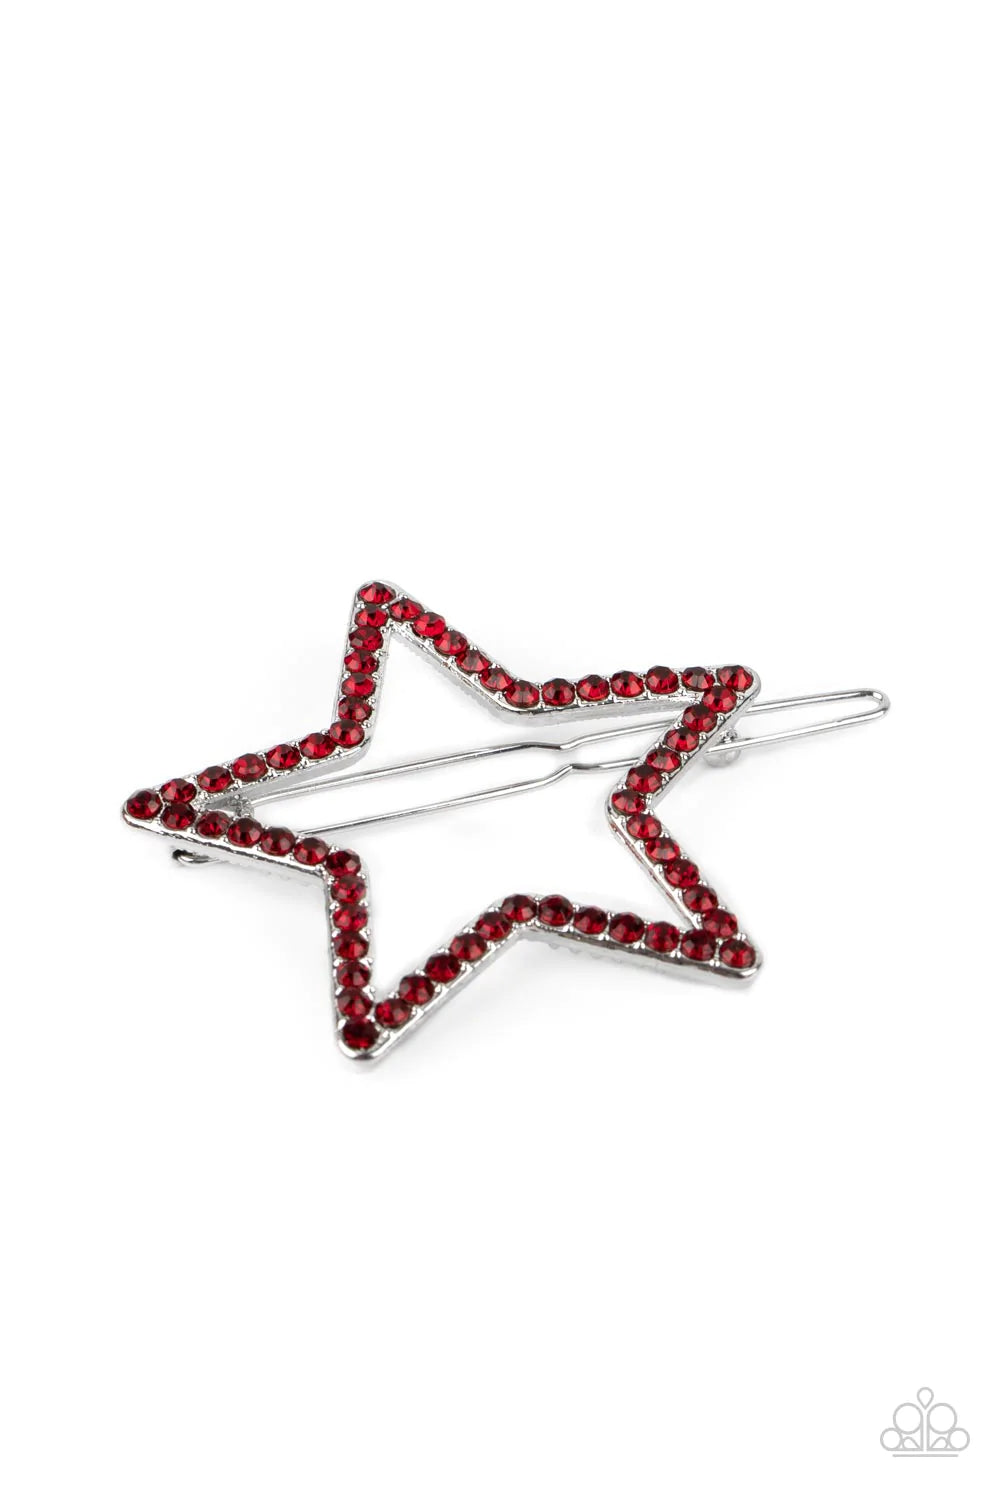 Paparazzi Accessories Stellar Standout - Red The front of an oversized silver star is encrusted in fiery red rhinestones, creating an inspiring patriotic shimmer. Features a clamp barrette closure. Sold as one individual barrette. Hair Pins